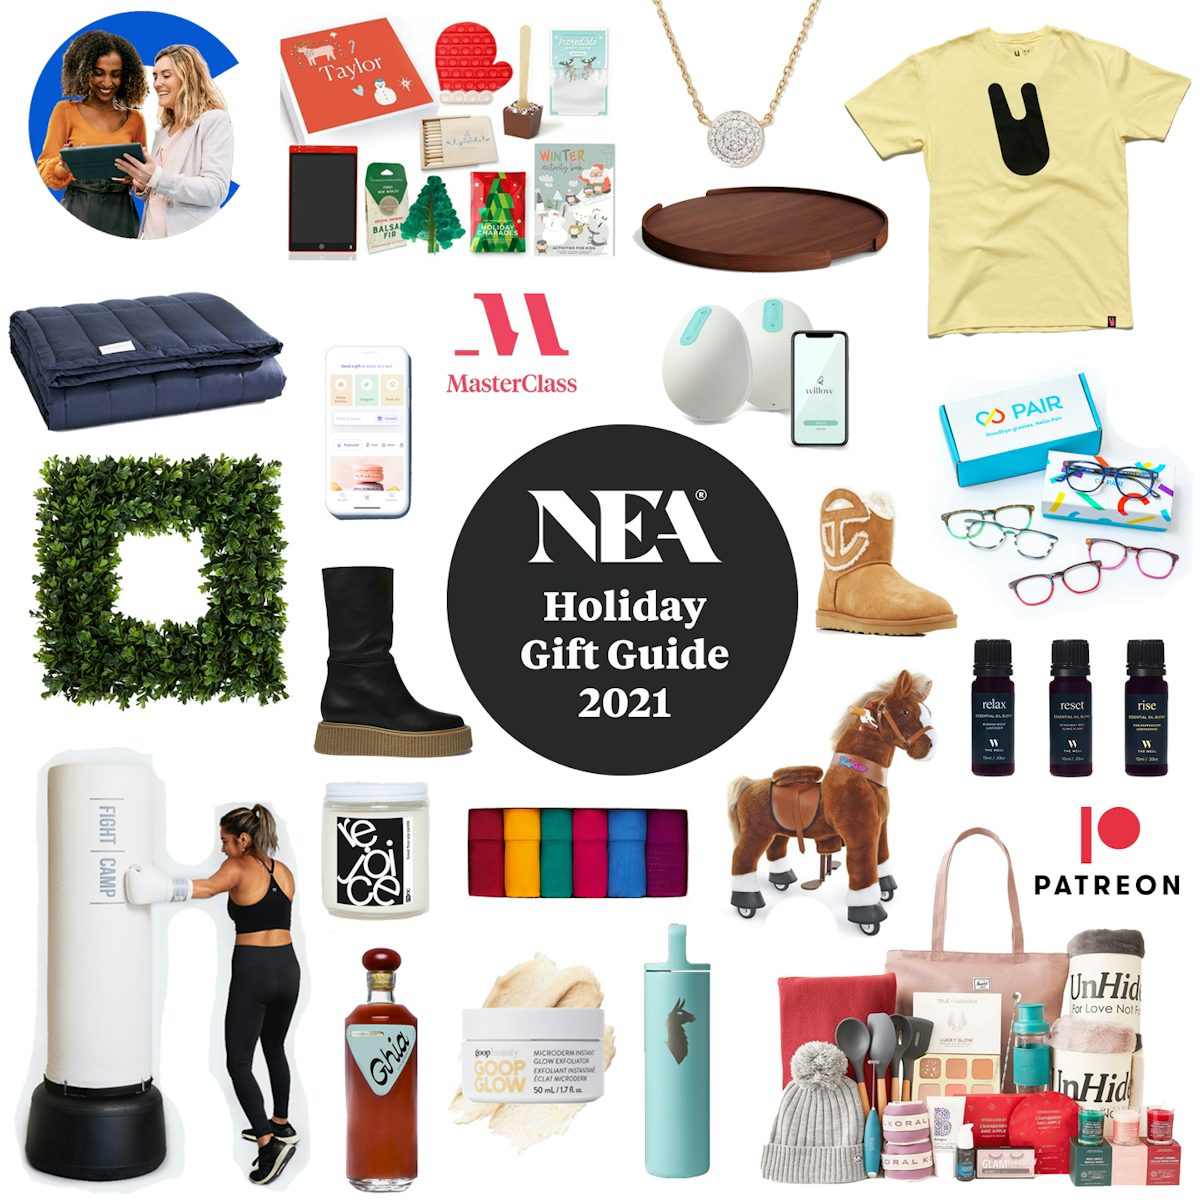 NEA Holiday Gift Guide 2021